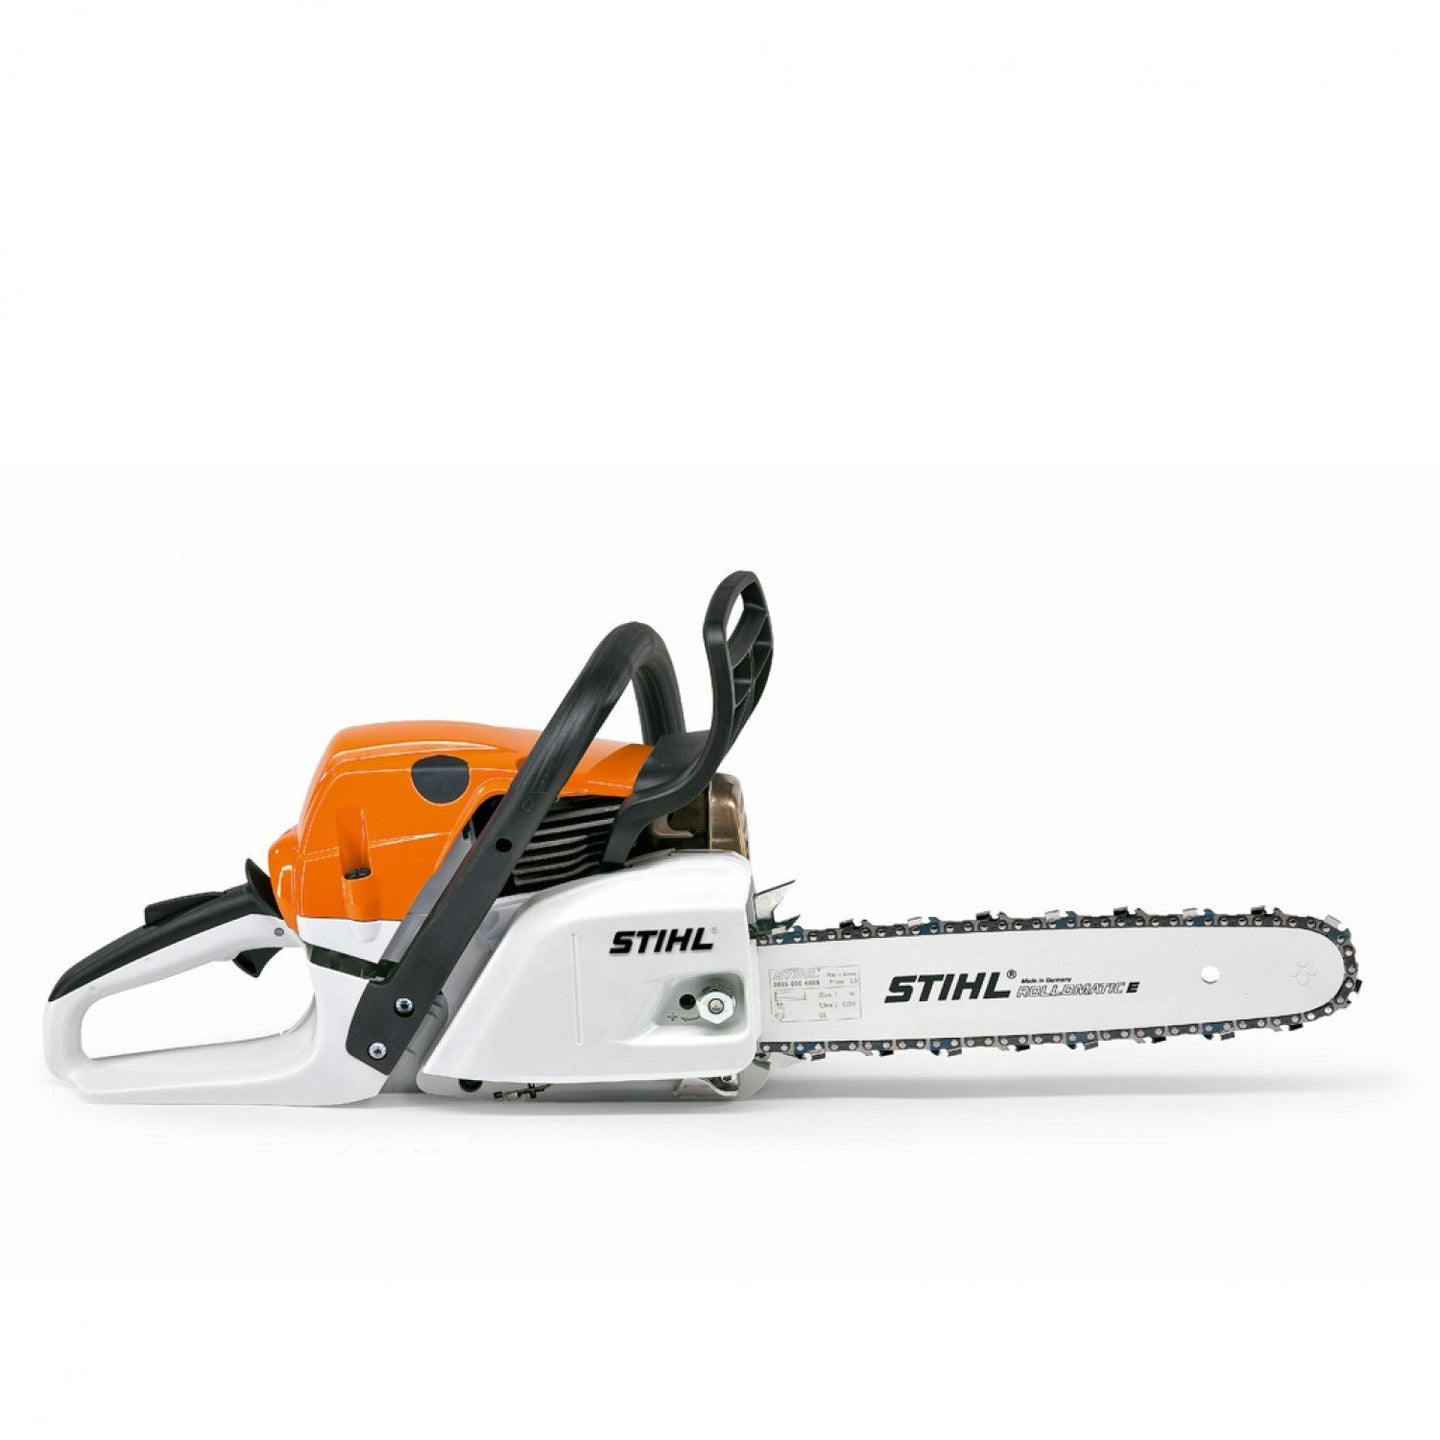 STIHL MS661 C-M Chainsaw 25" Review